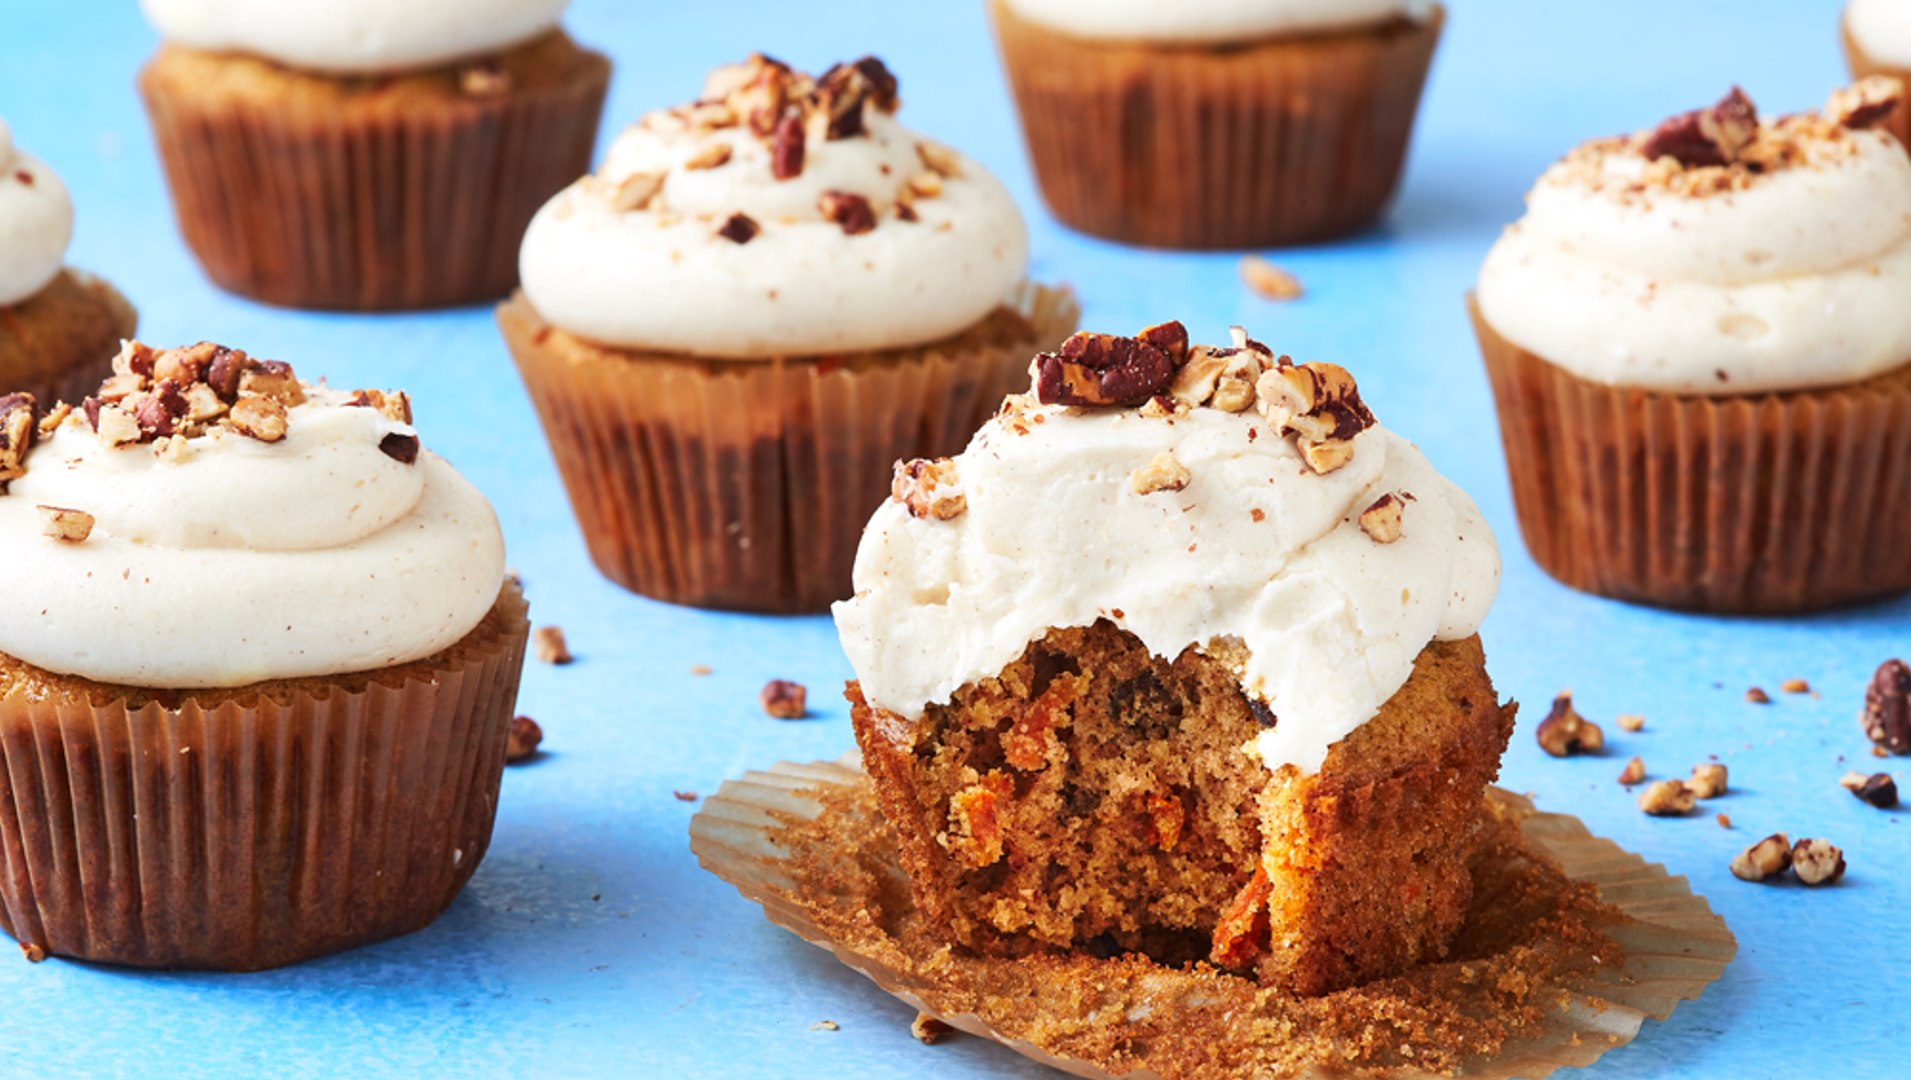 Make Your Favorite Spring Dessert Shareable With Carrot Cake Cupcakes